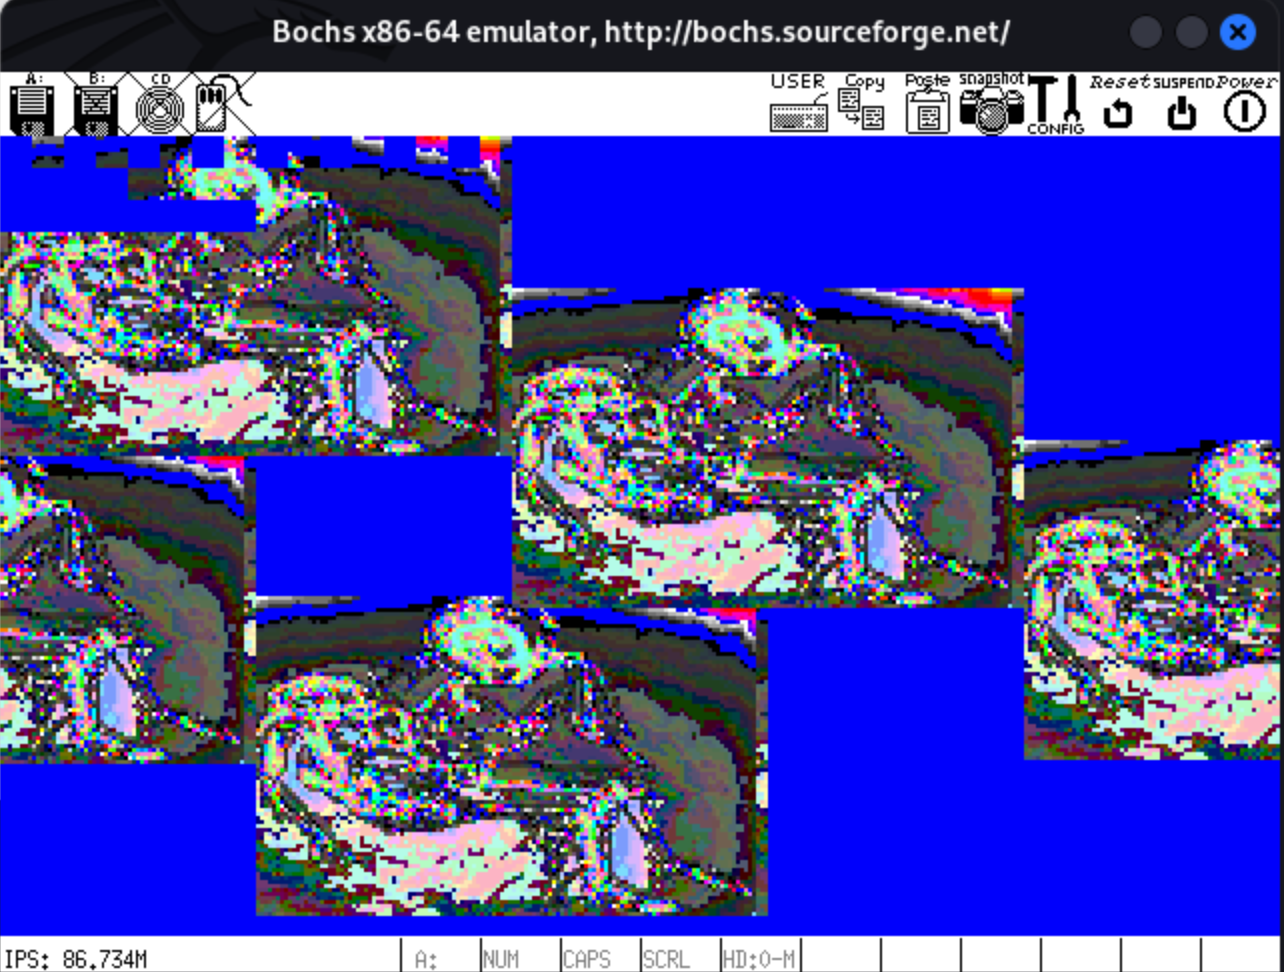 A screenshot of the graphics payload displayed by the Michelangelo REanimator bootkit, a sprite (pixelated image) is displayed in a repeated pattern across the screen; the sprite is a drawing of a study of Michelangeo's Pieta, thus the image is of a woman (Mary) holding the body of her son (Jesus); color palette of the entire image is a range of pinks and blues, but each sprite tile has a slightly altered subset of colors from that palette.